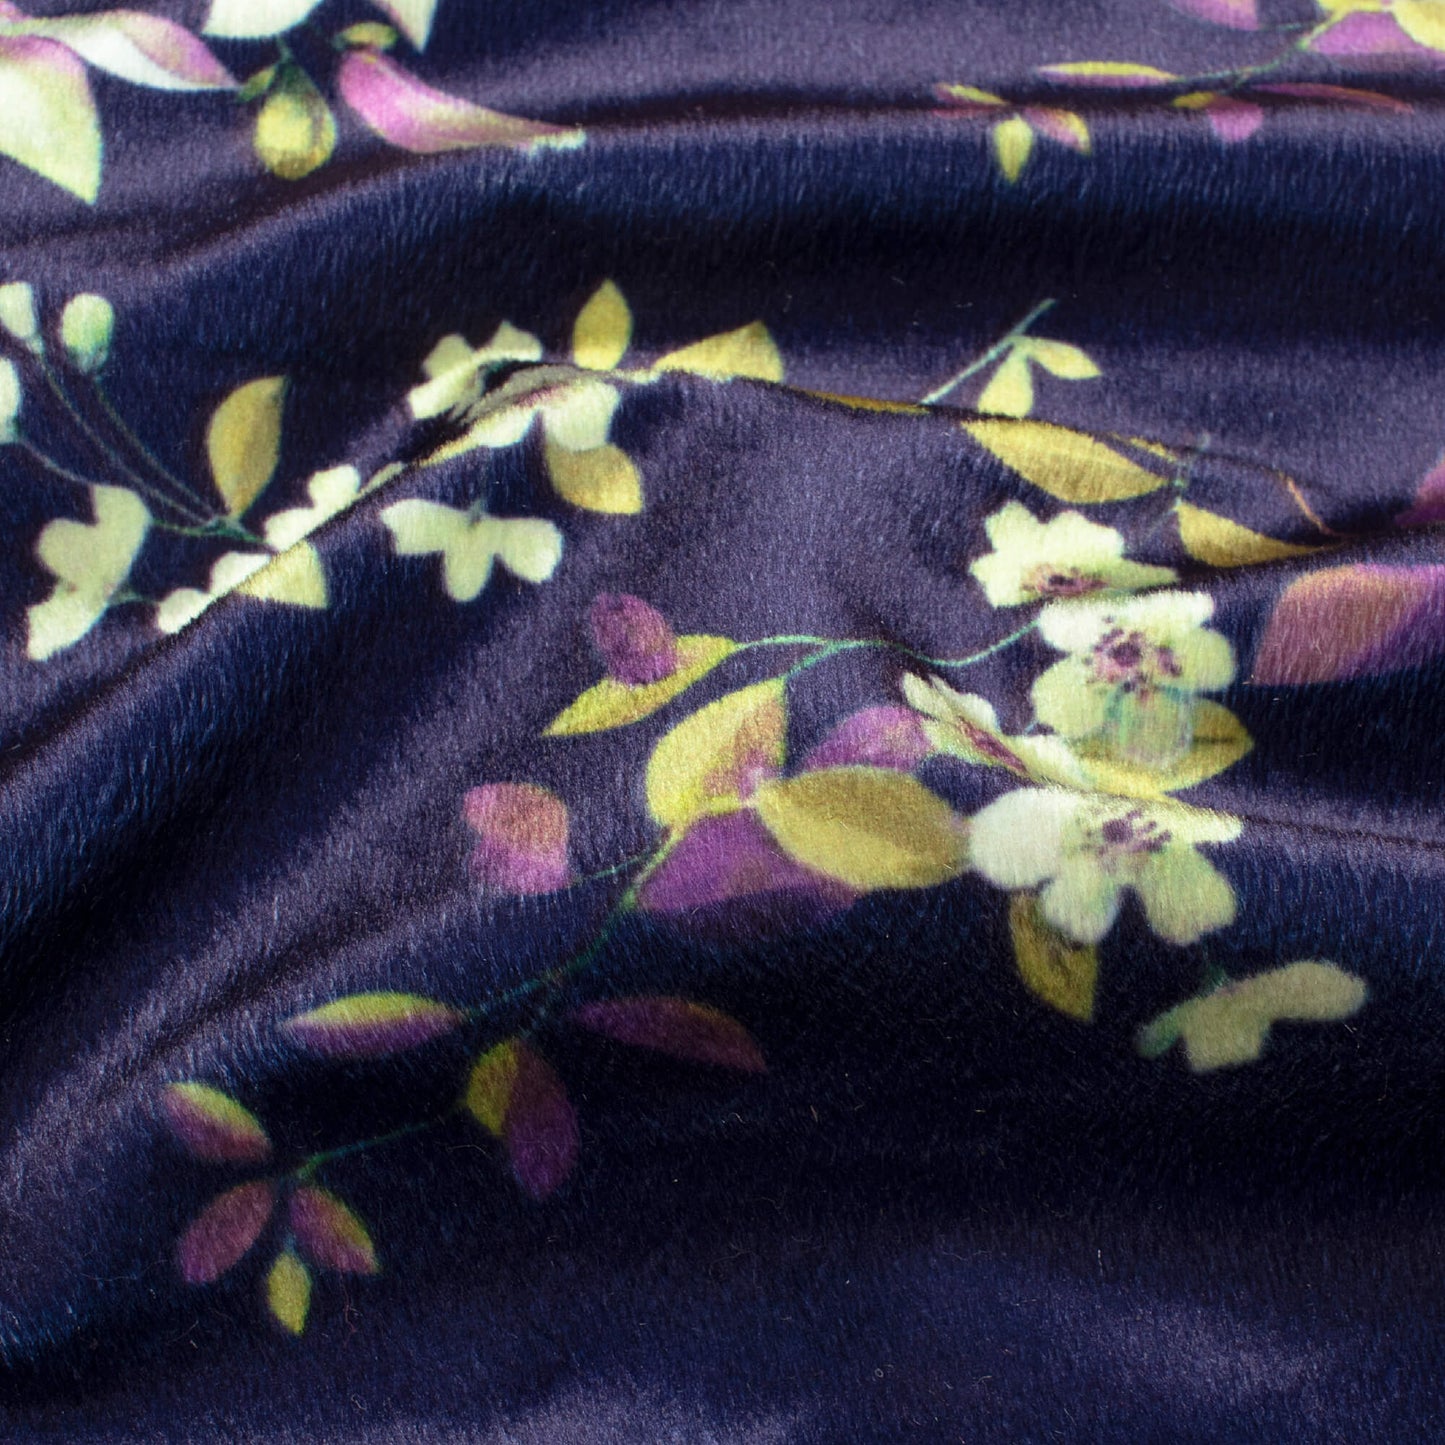 Deep Violet Purple And Cream Floral Pattern Digital Print Velvet Fabric (Width 54 Inches)